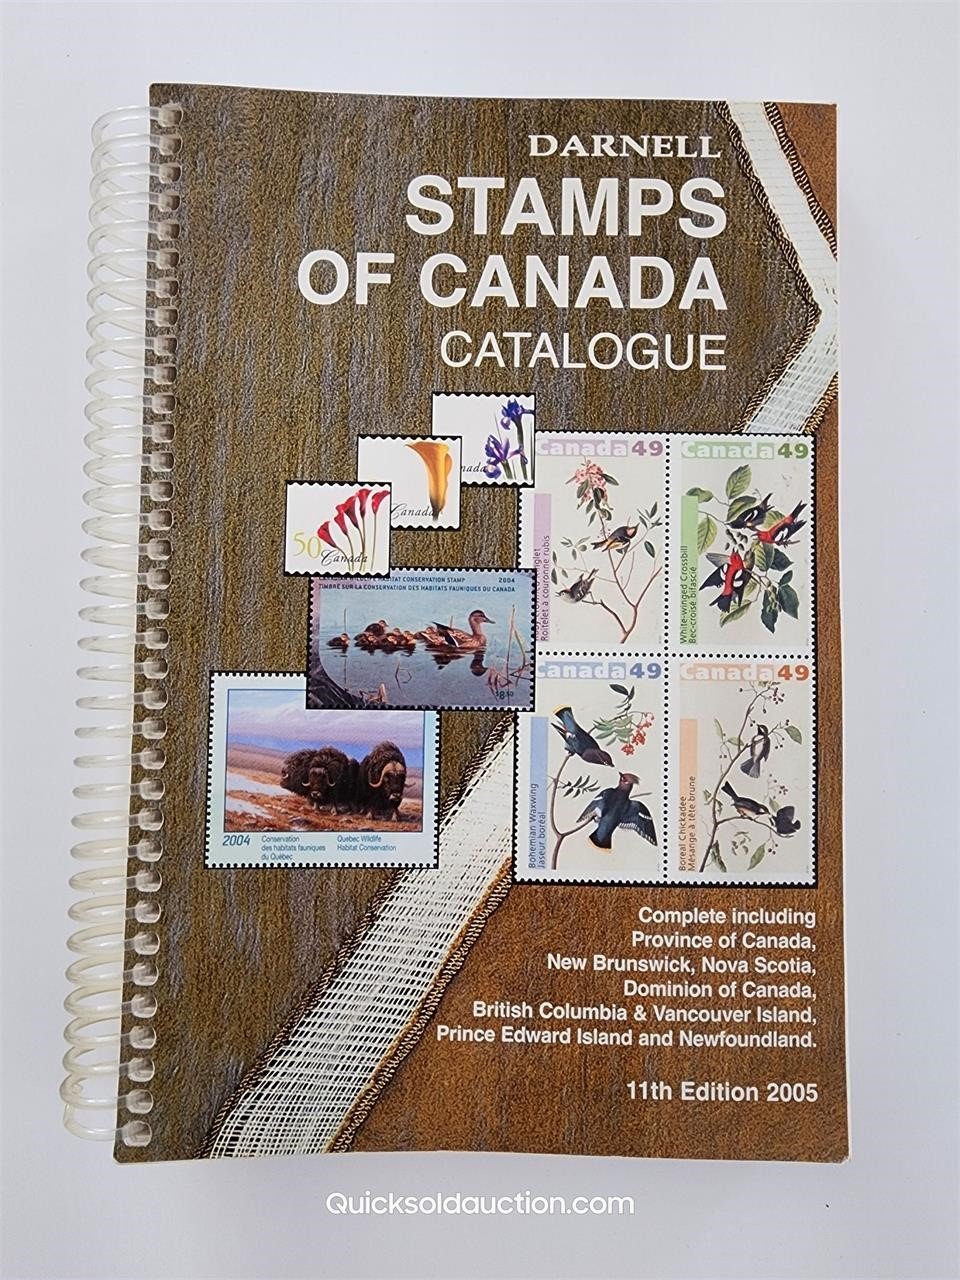 Darnell Stamps Of Canada Catalogue